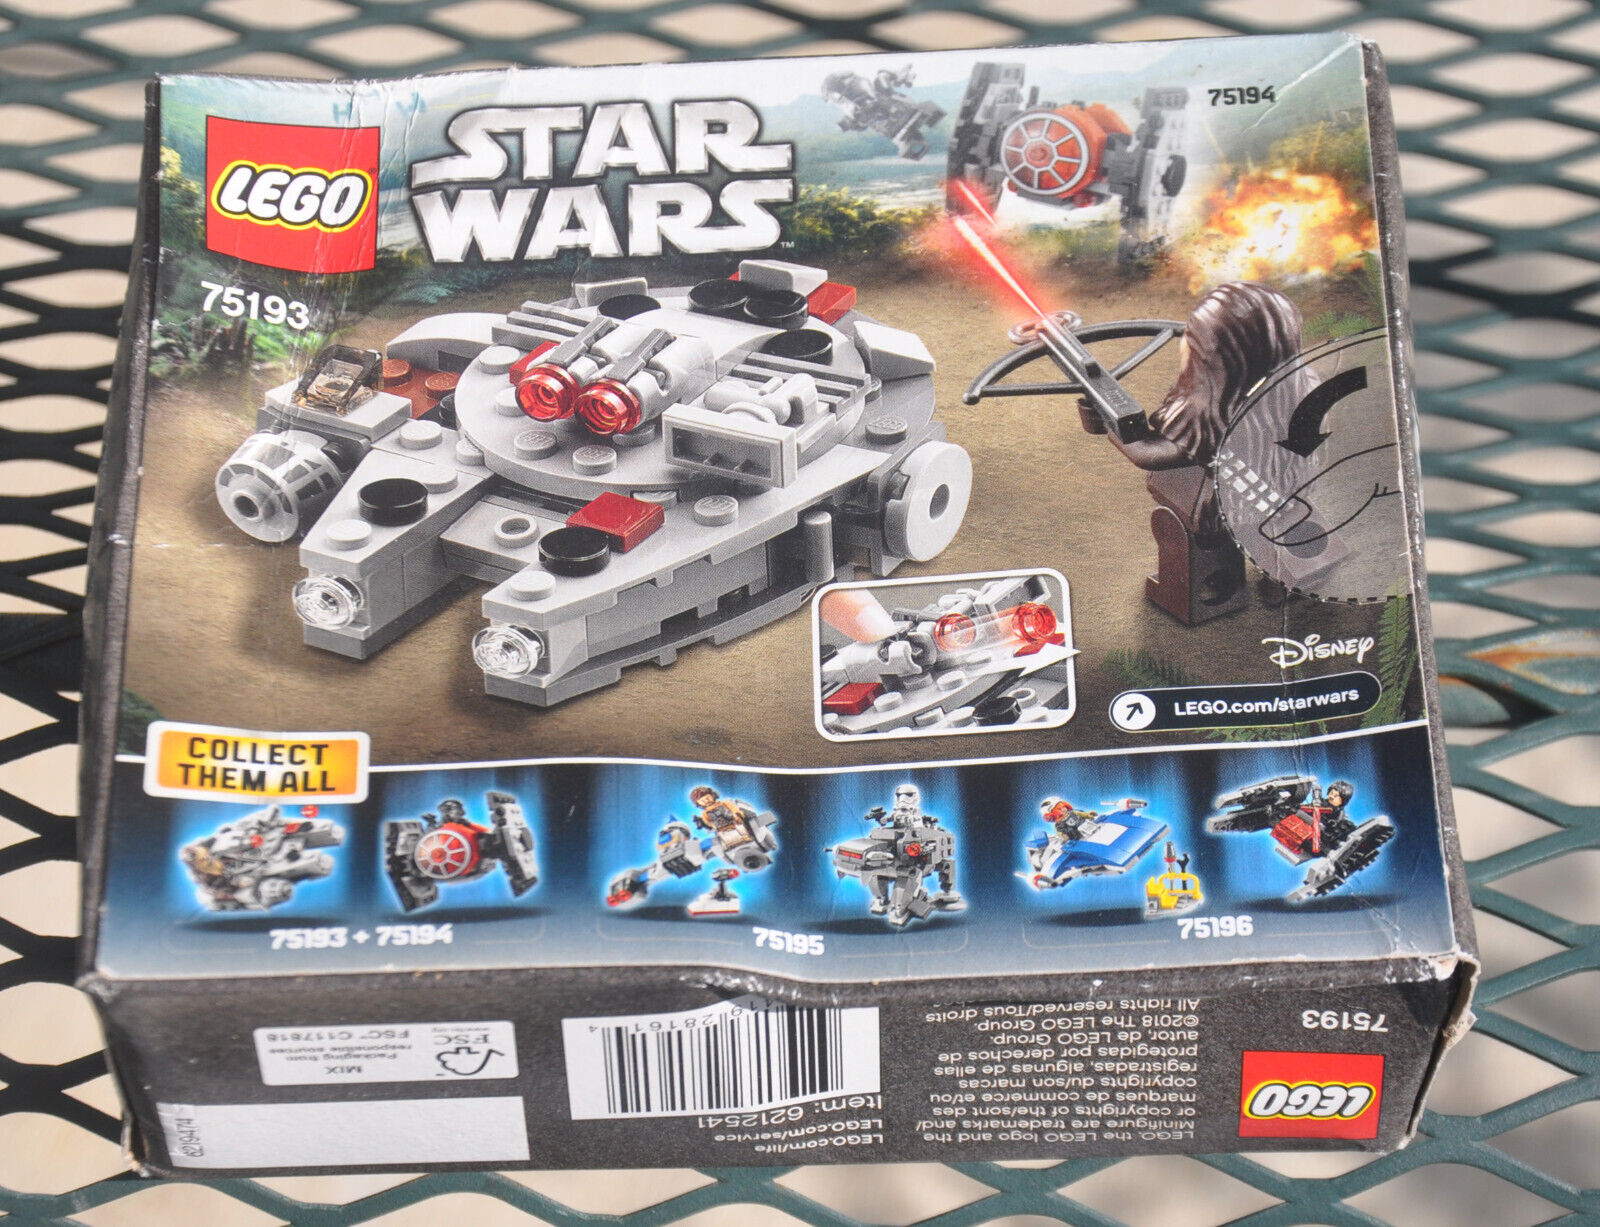 Forføre Slette bang LEGO Star Wars: Millennium Falcon Microfighter (75193) - New In Factory Box  673419281614 | eBay